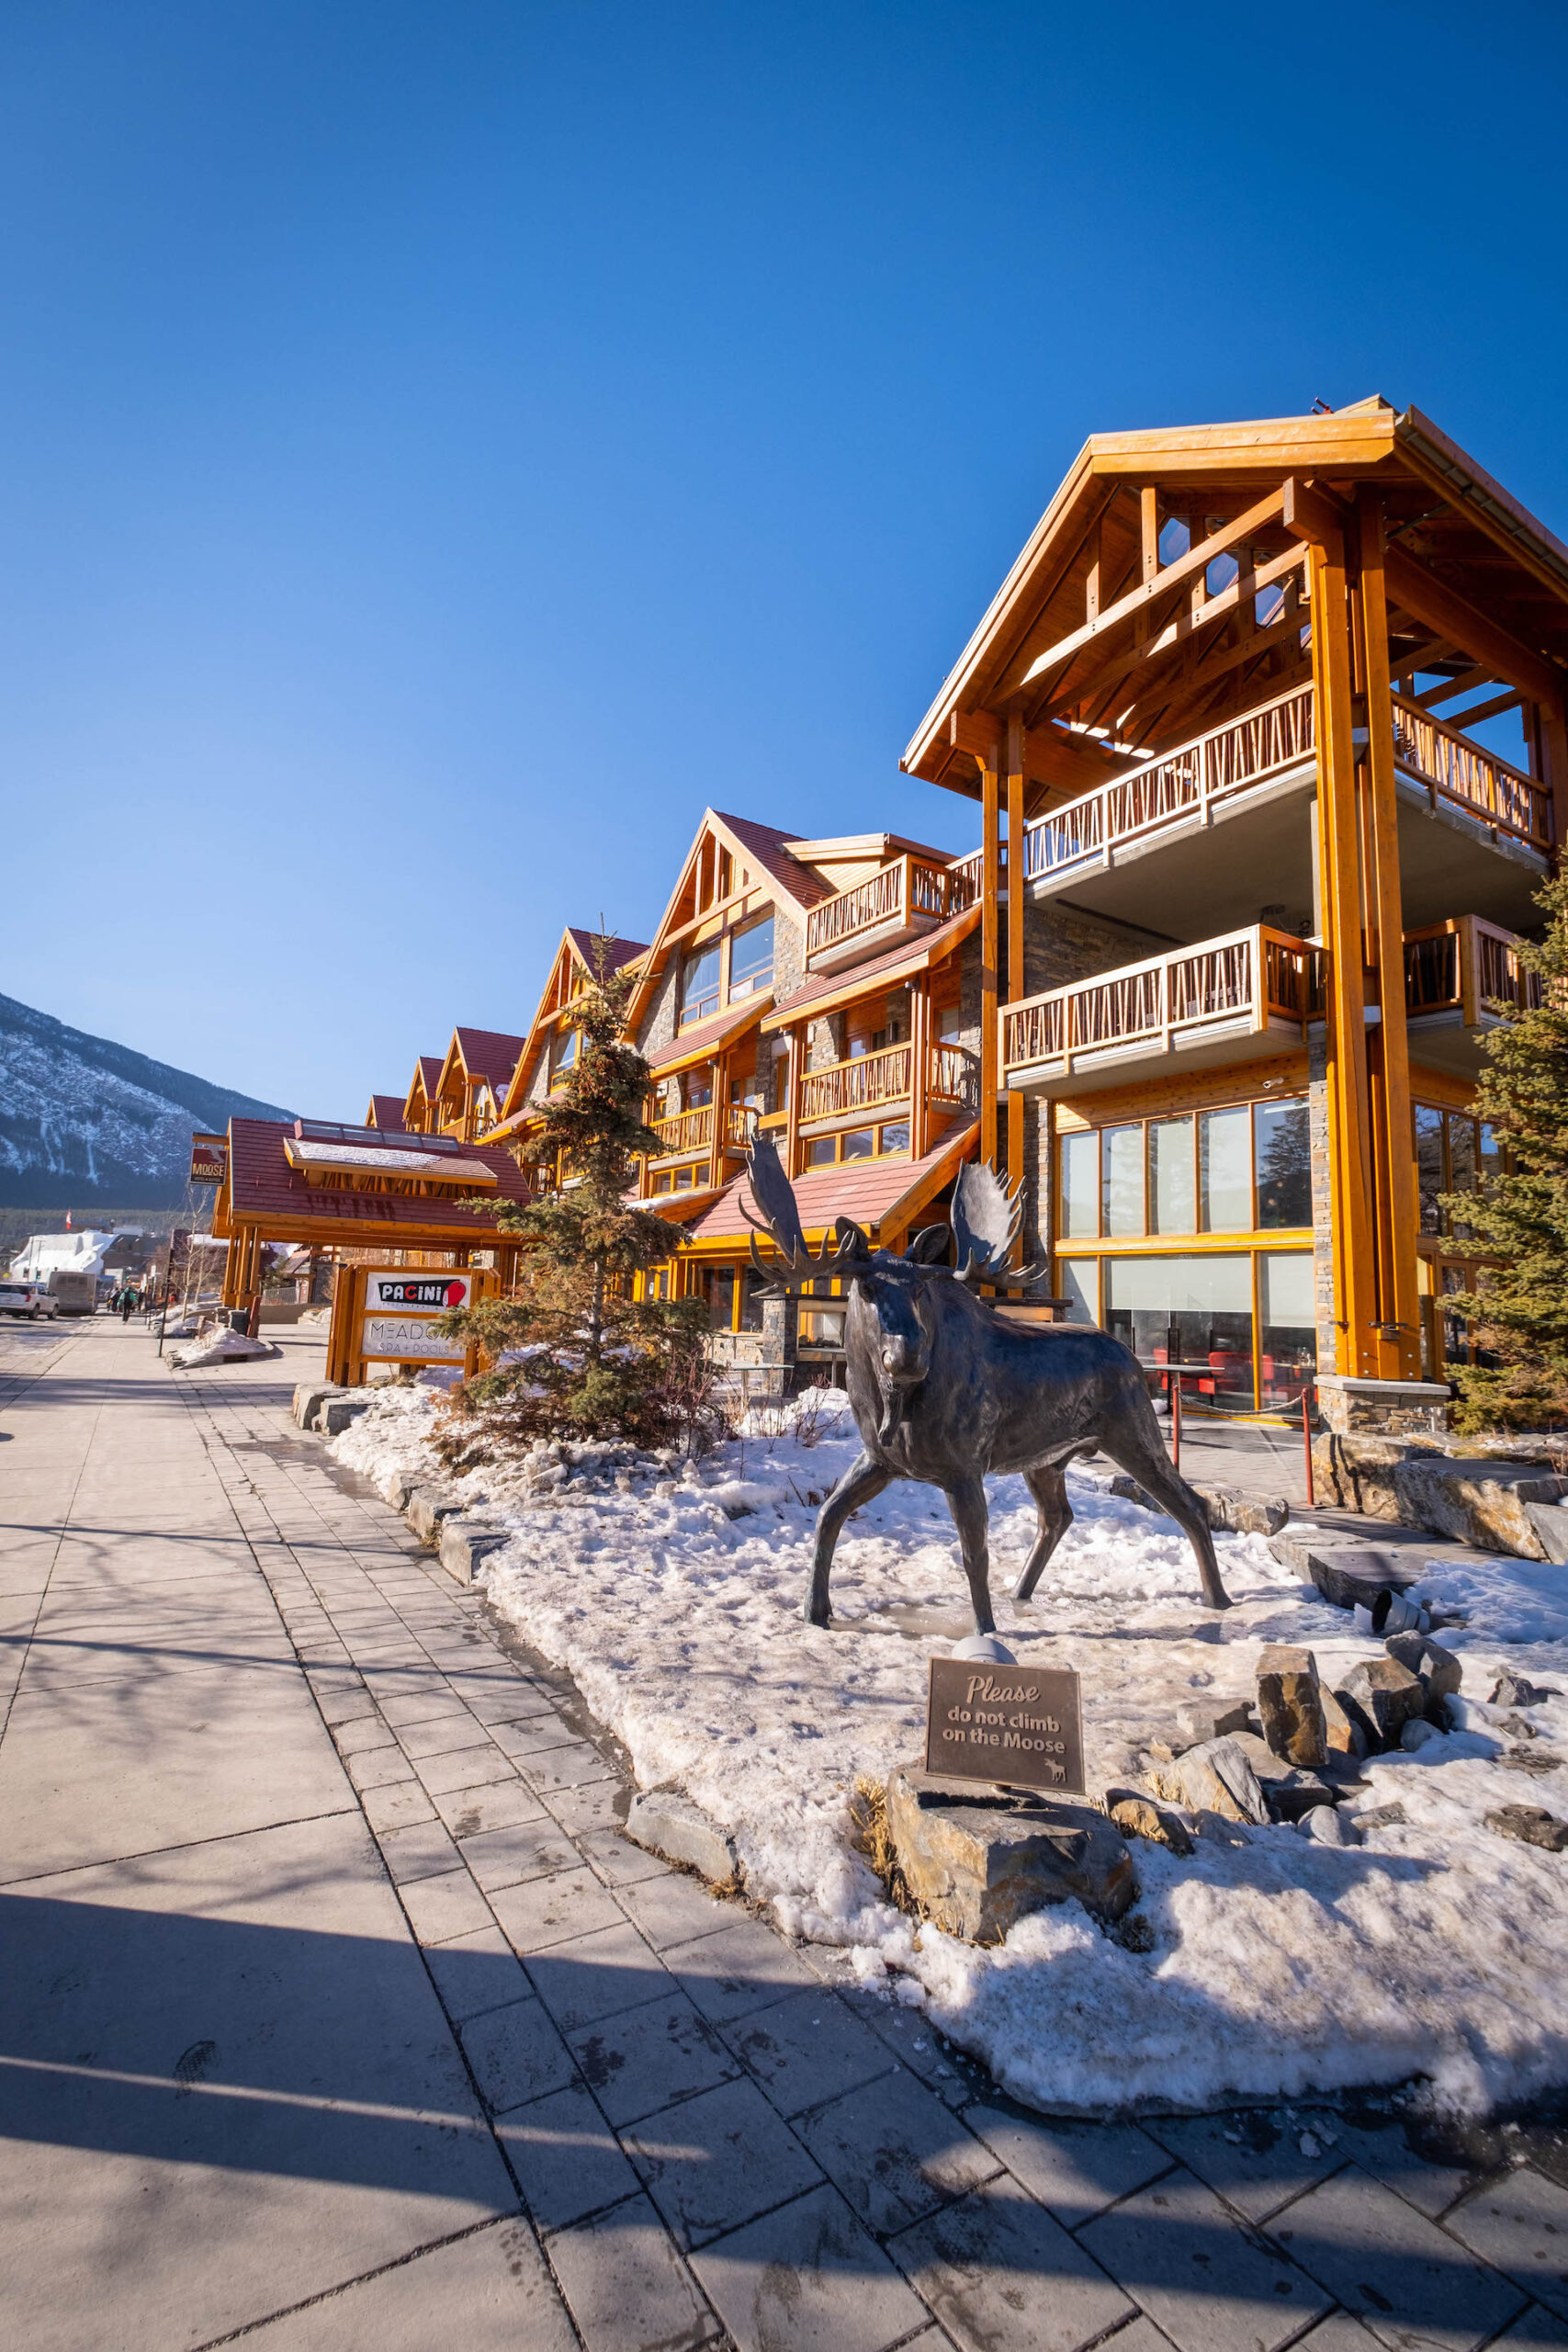 The Moose Hotel in Banff